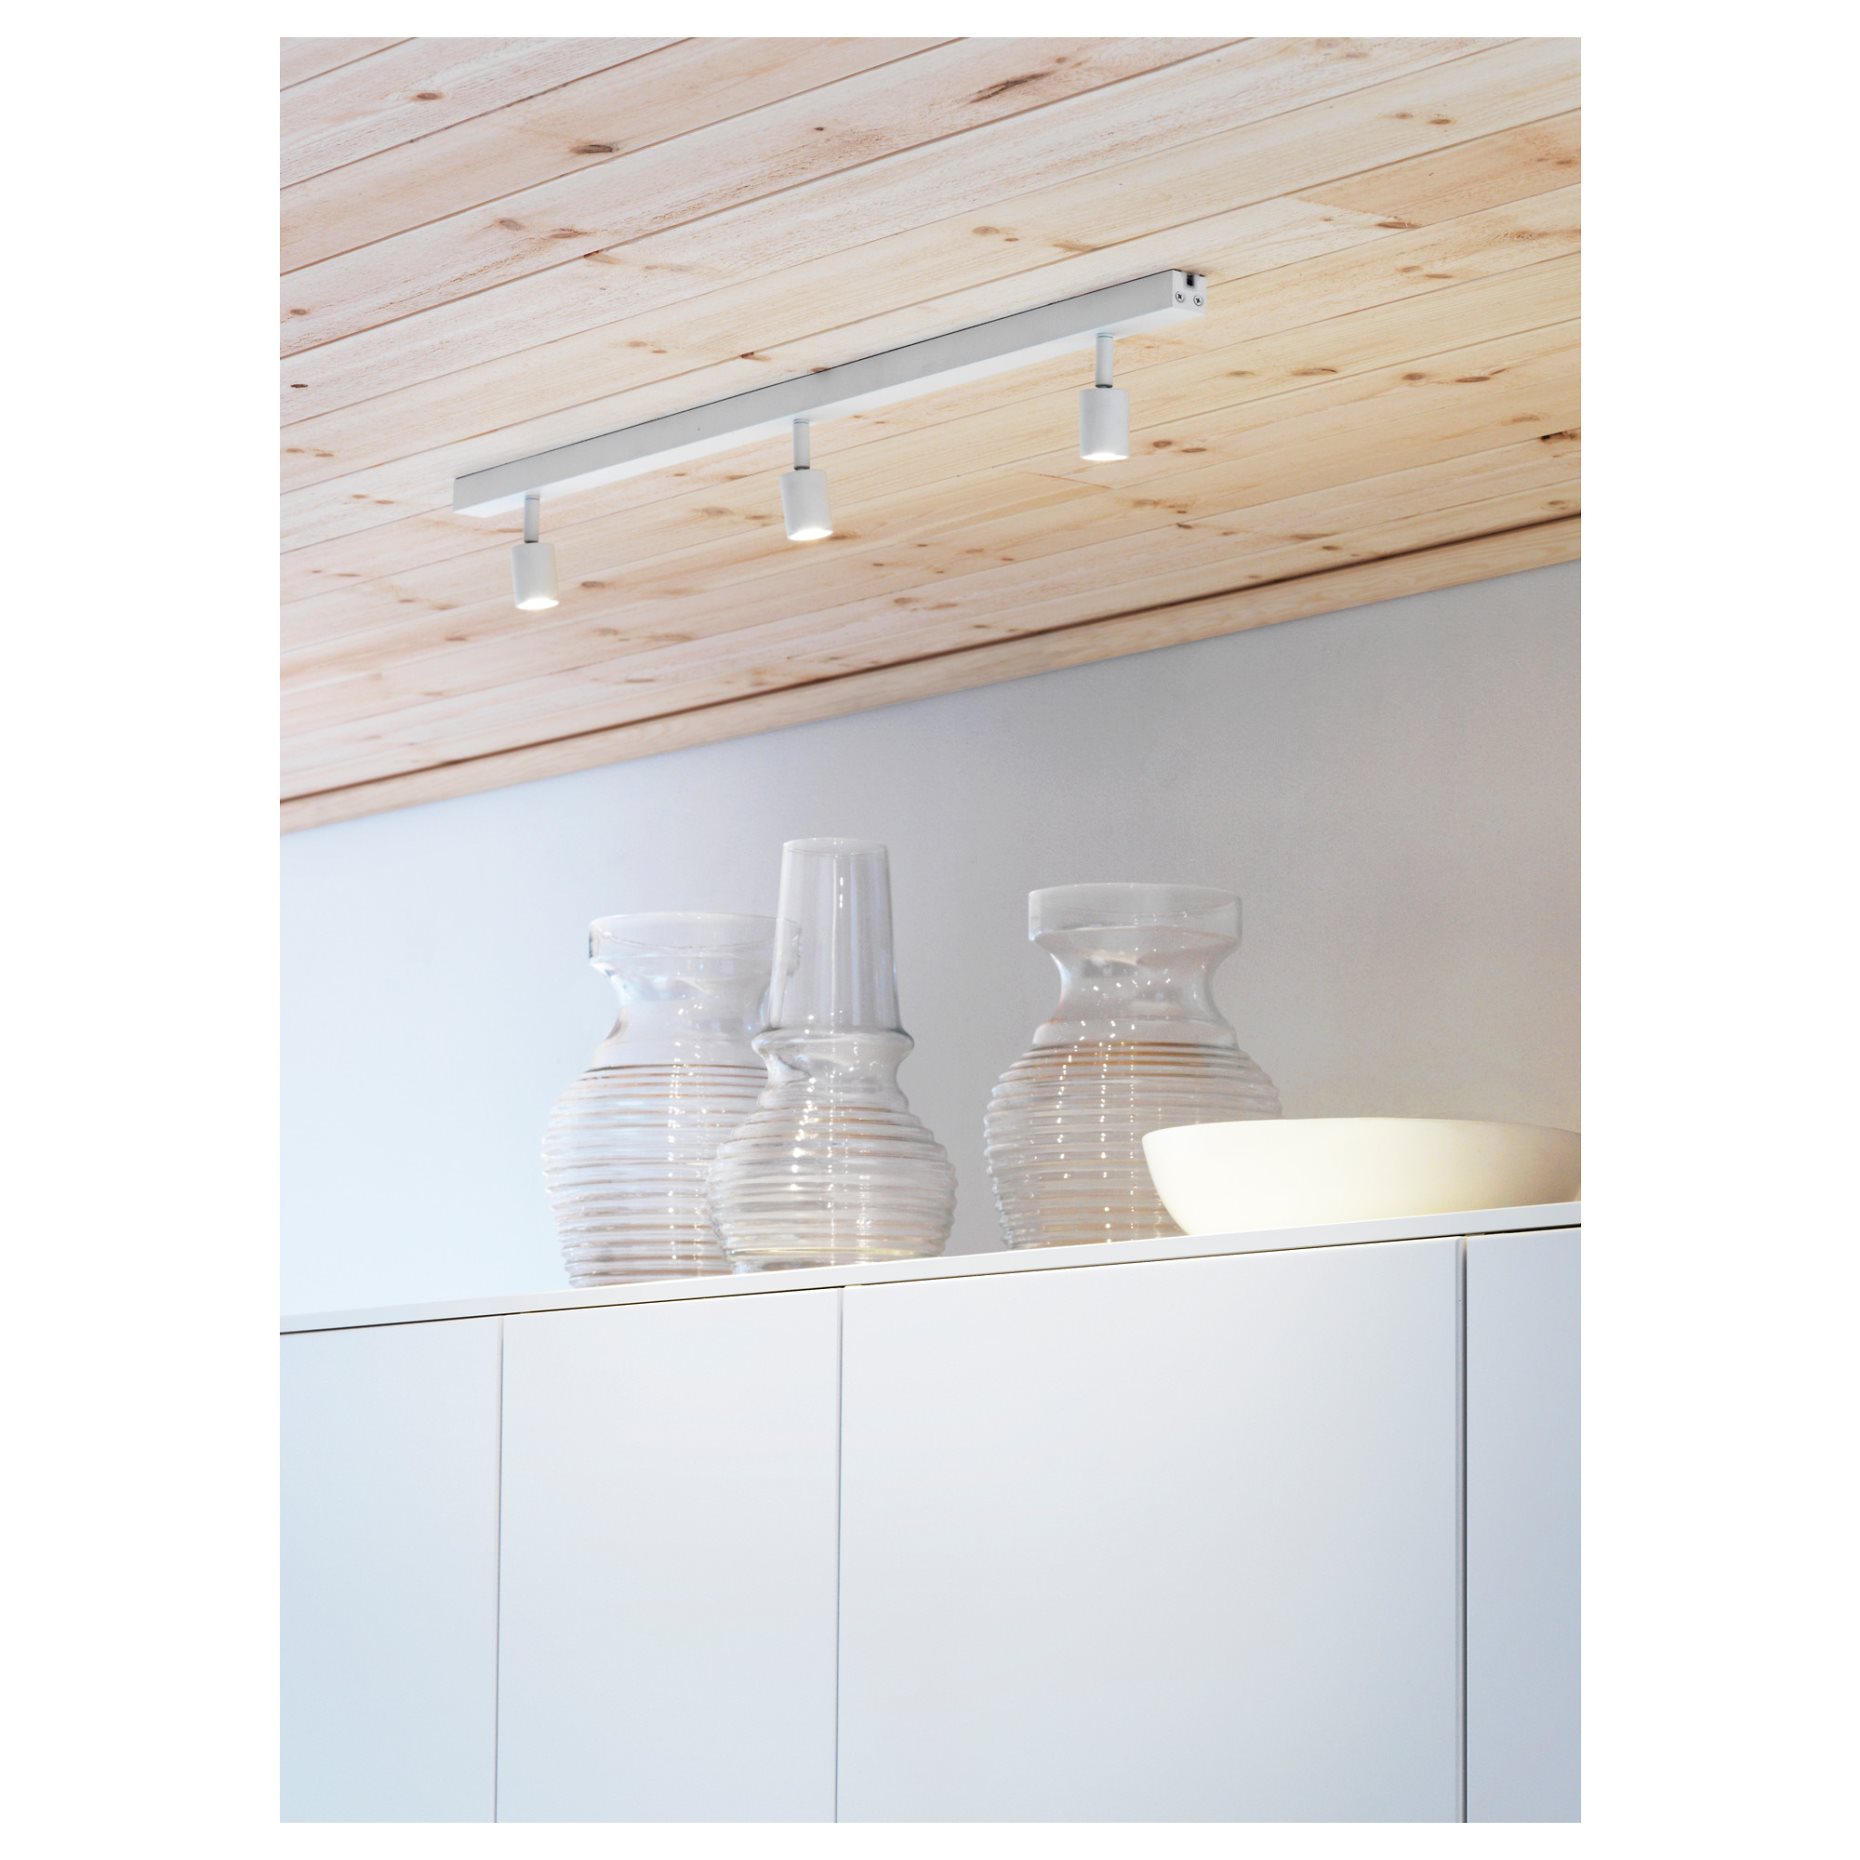 BÄVE, ceiling track with built-in LED light source, 3-spots, 005.272.38